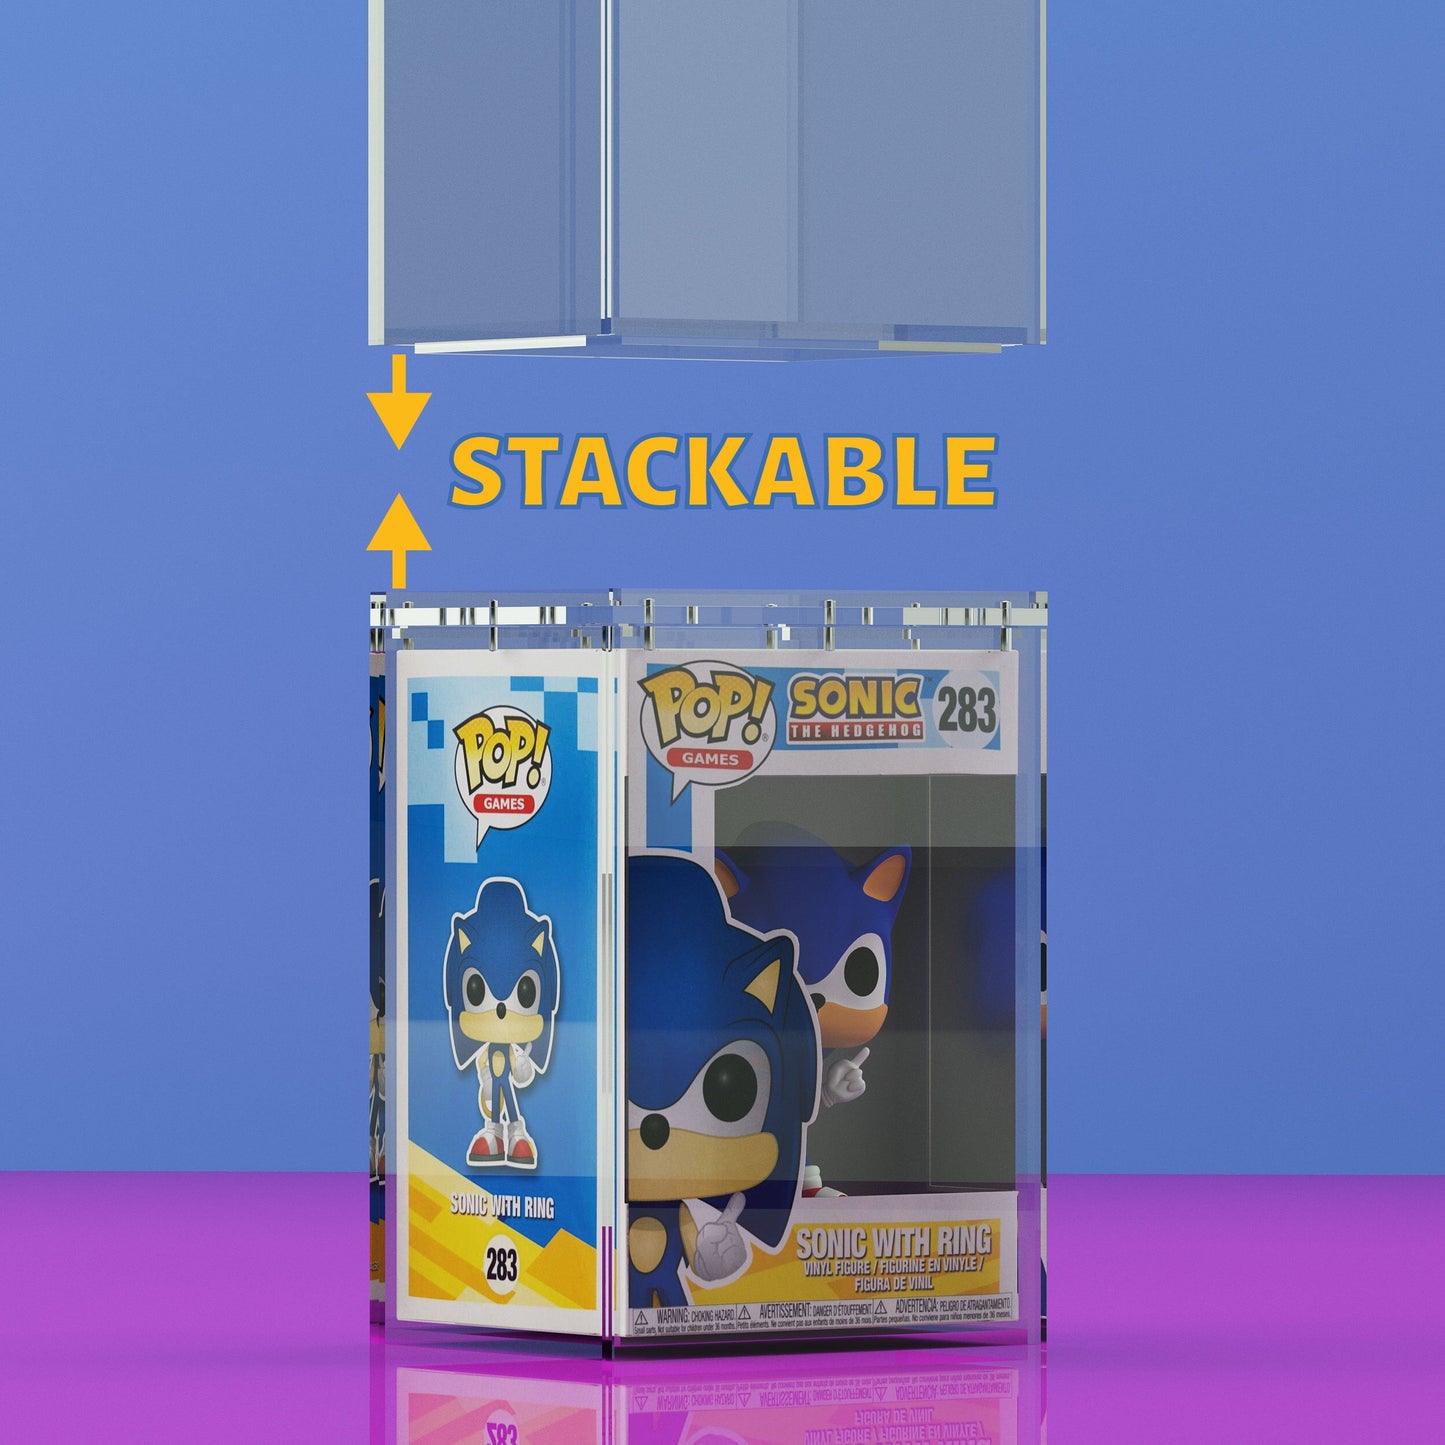 Standard Size Hard Protectors 2-Count Mighty Guards (Compatible with - 4" Funko POP! ) - Stackable with Magnetic Lid